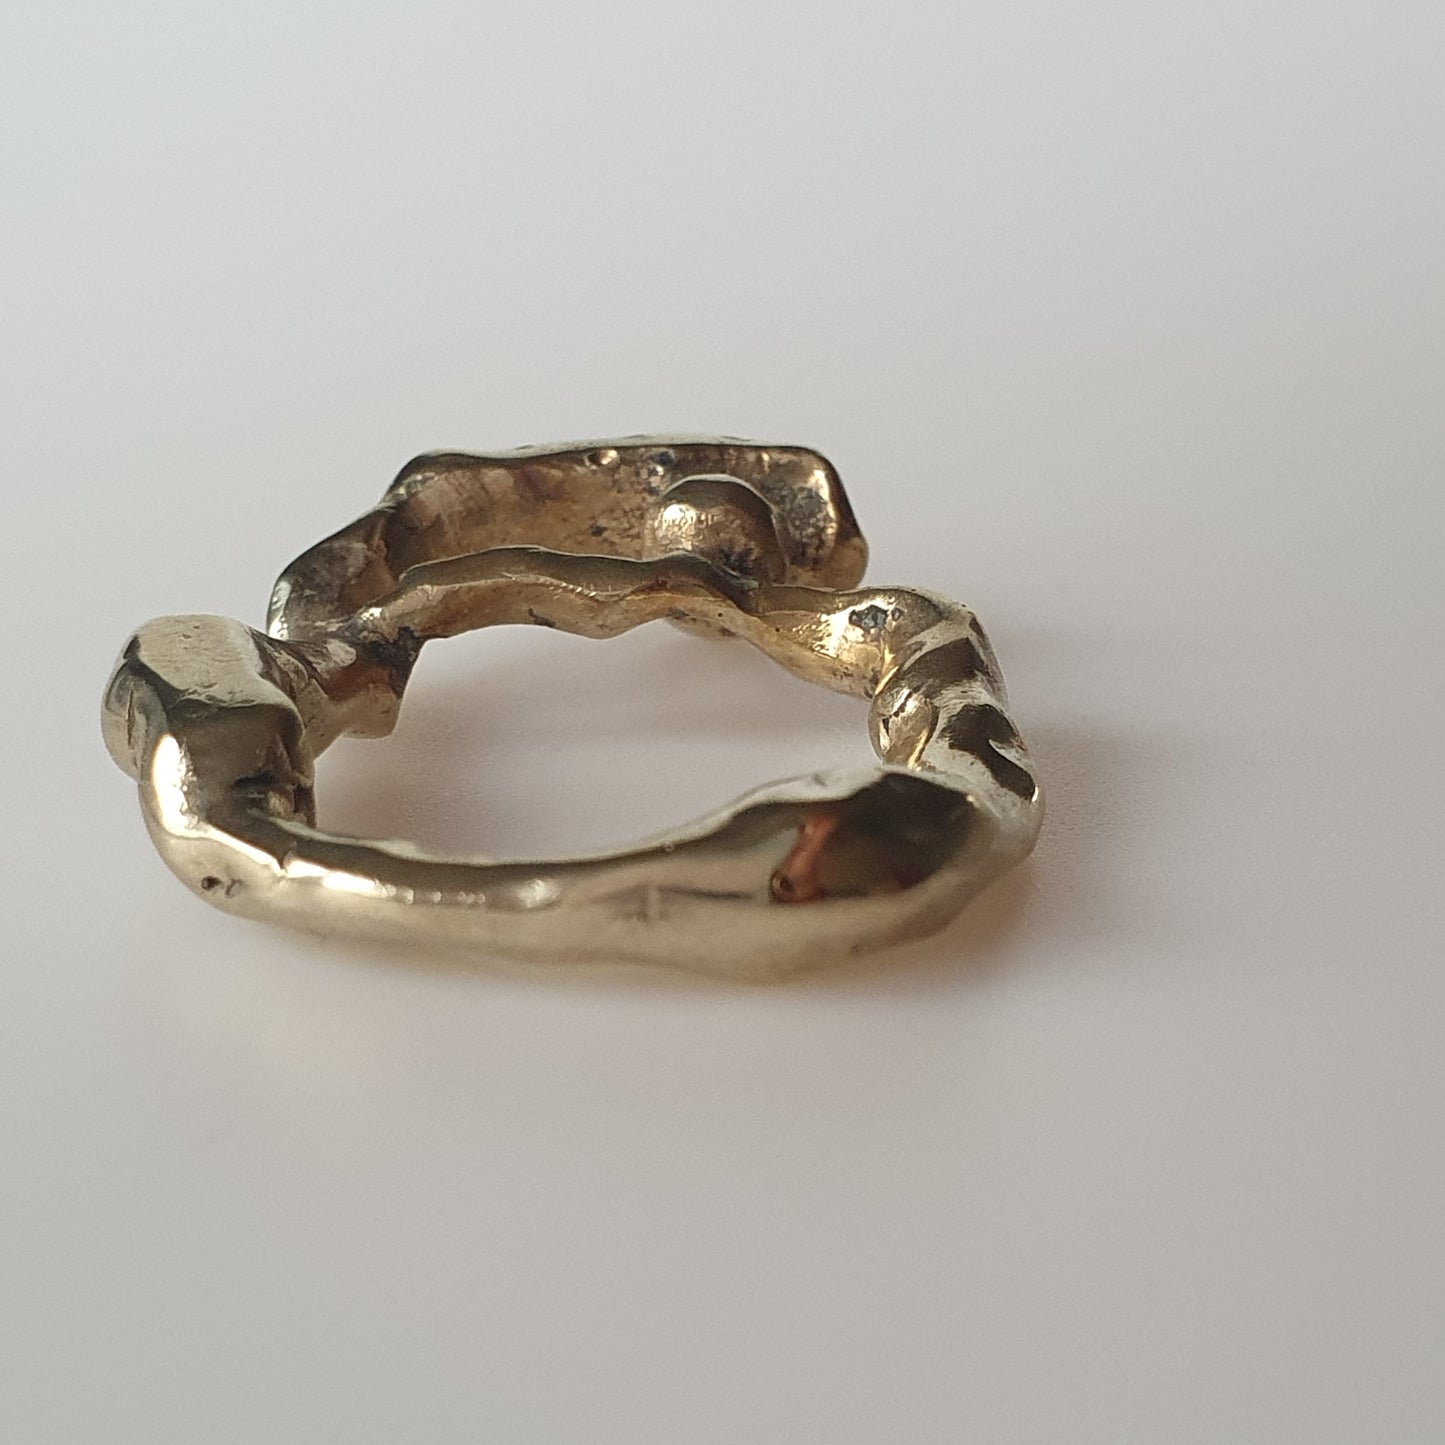 18ct gold plated on sterling silver, Artistic brutalist designed ring in solid sterling silver industrial aesthetic